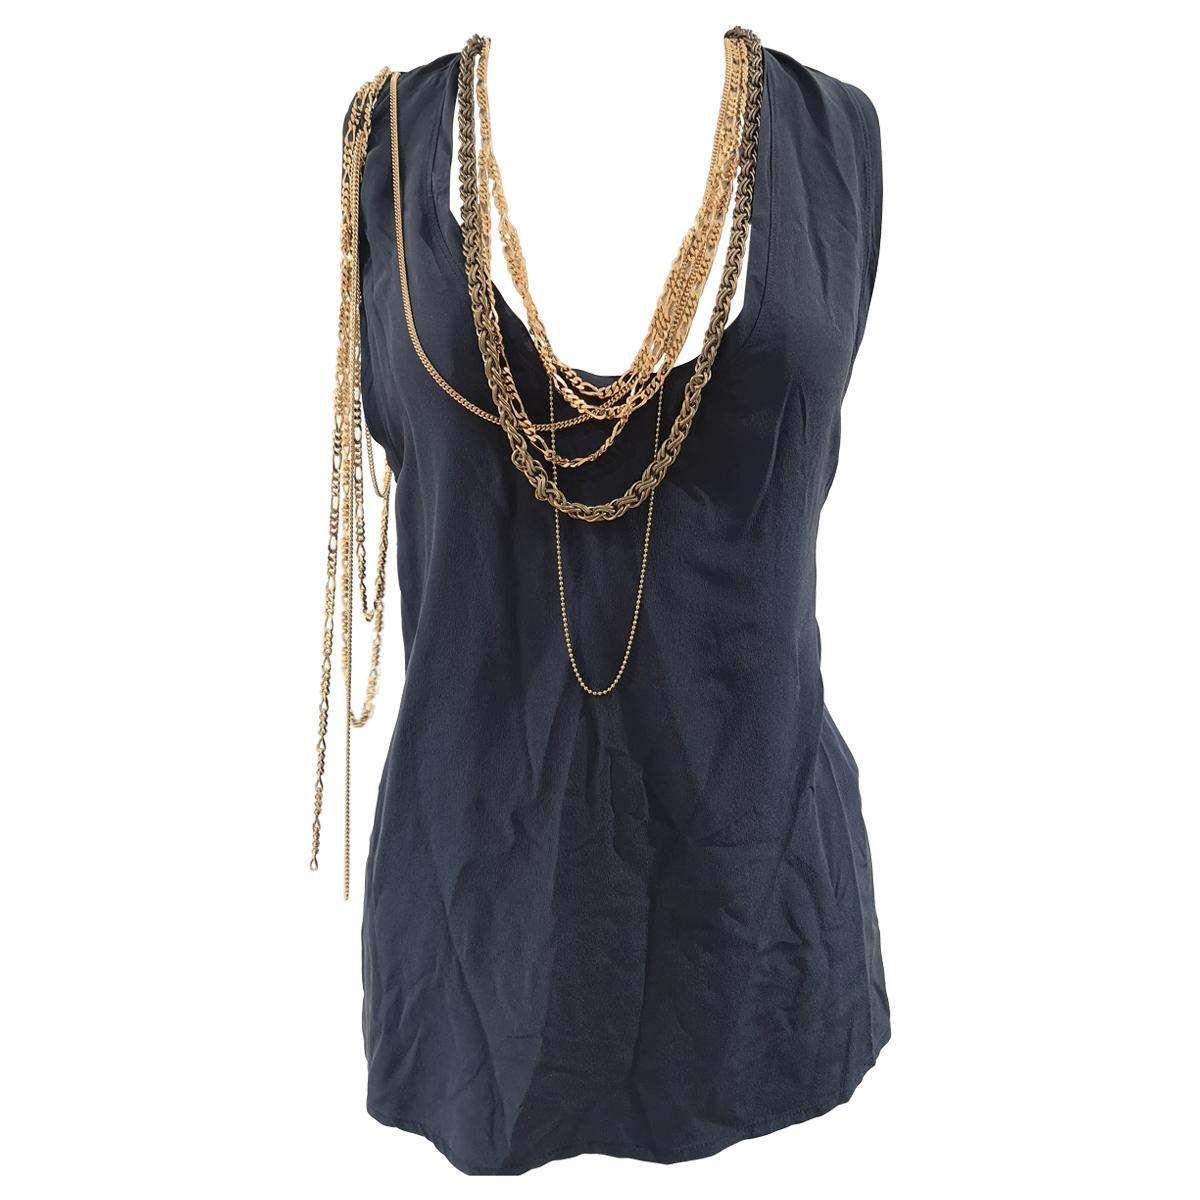 Balmain Navy Blue Sleeveless Top with Gold Chains For Sale